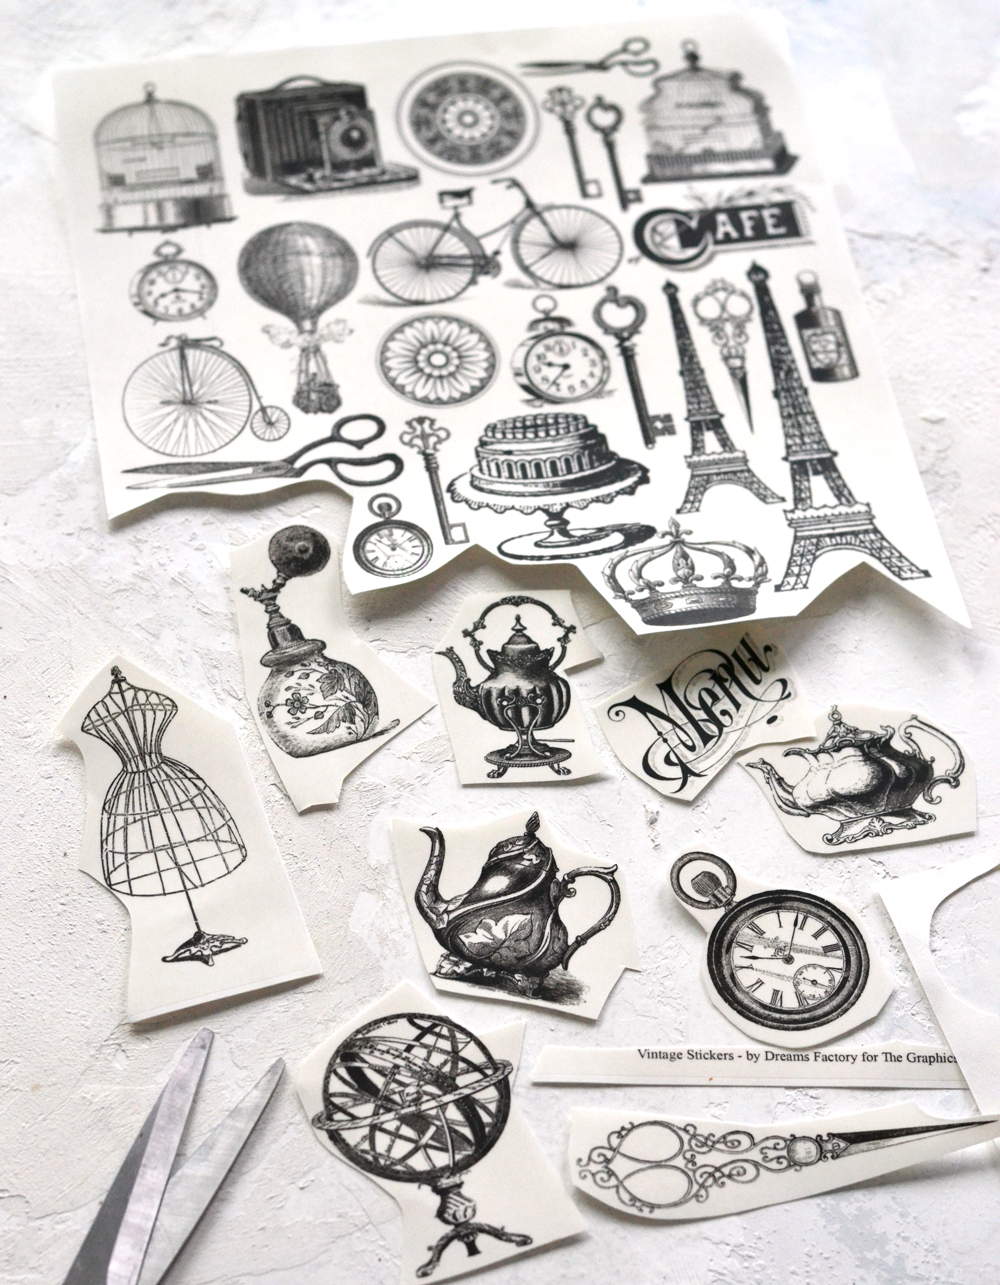 How to make amazing vintage stickers + free printable!